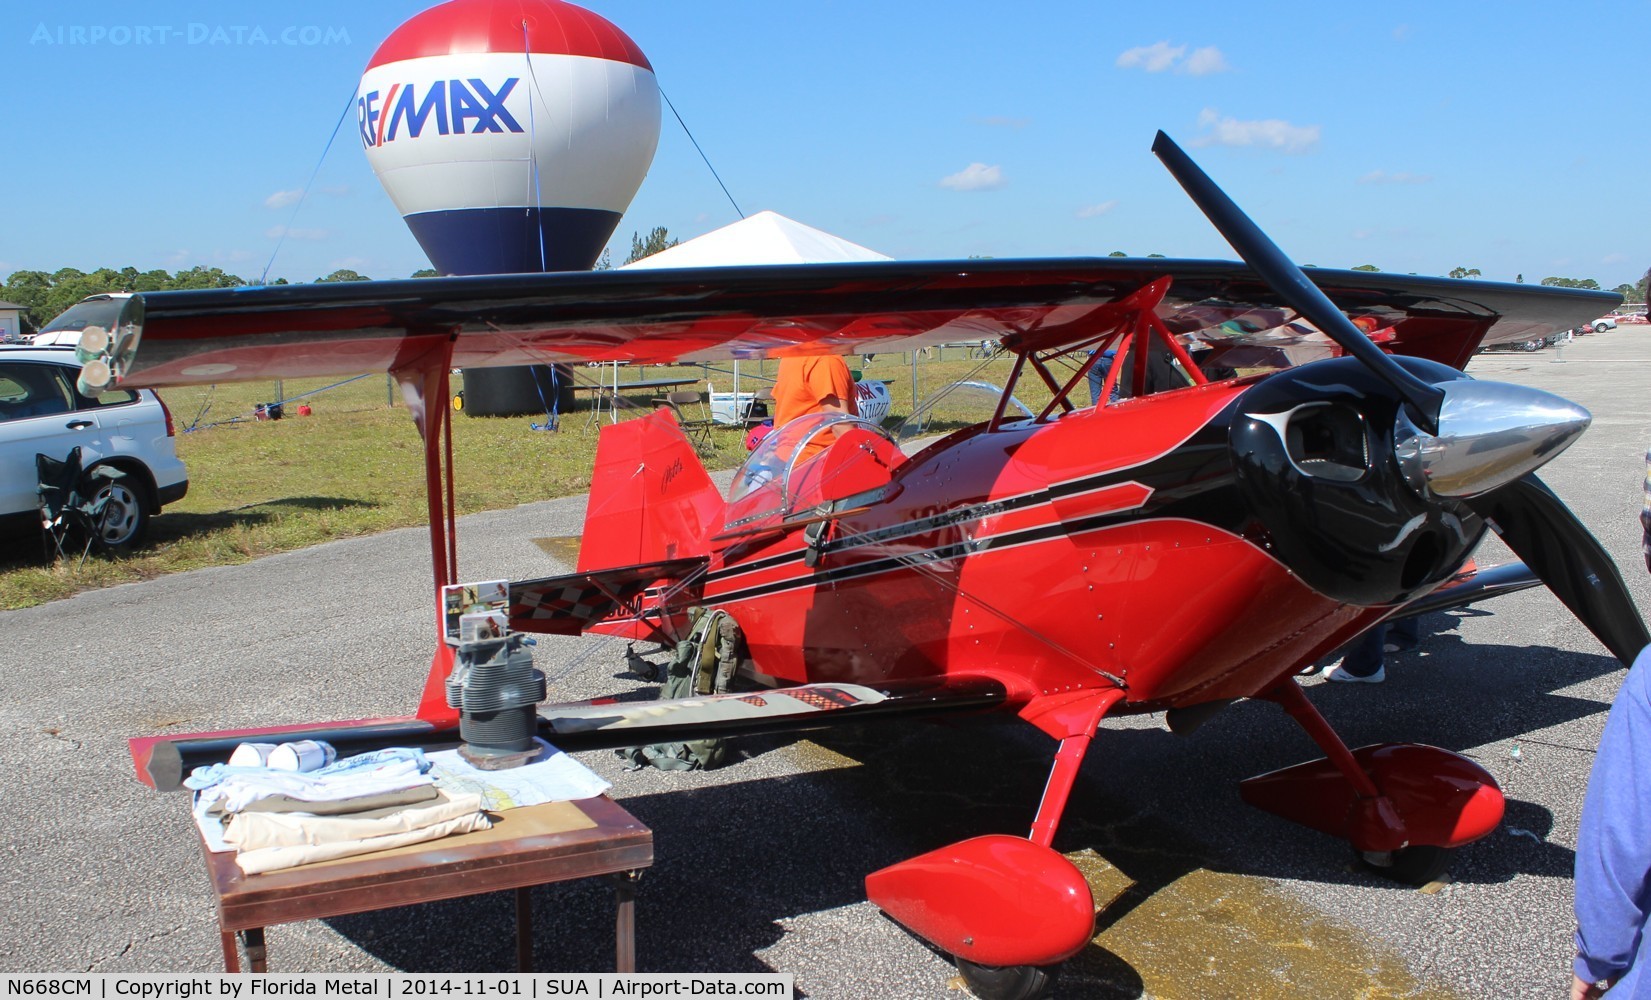 N668CM, 2013 Pitts S-1 Special C/N 068, Chefpitts